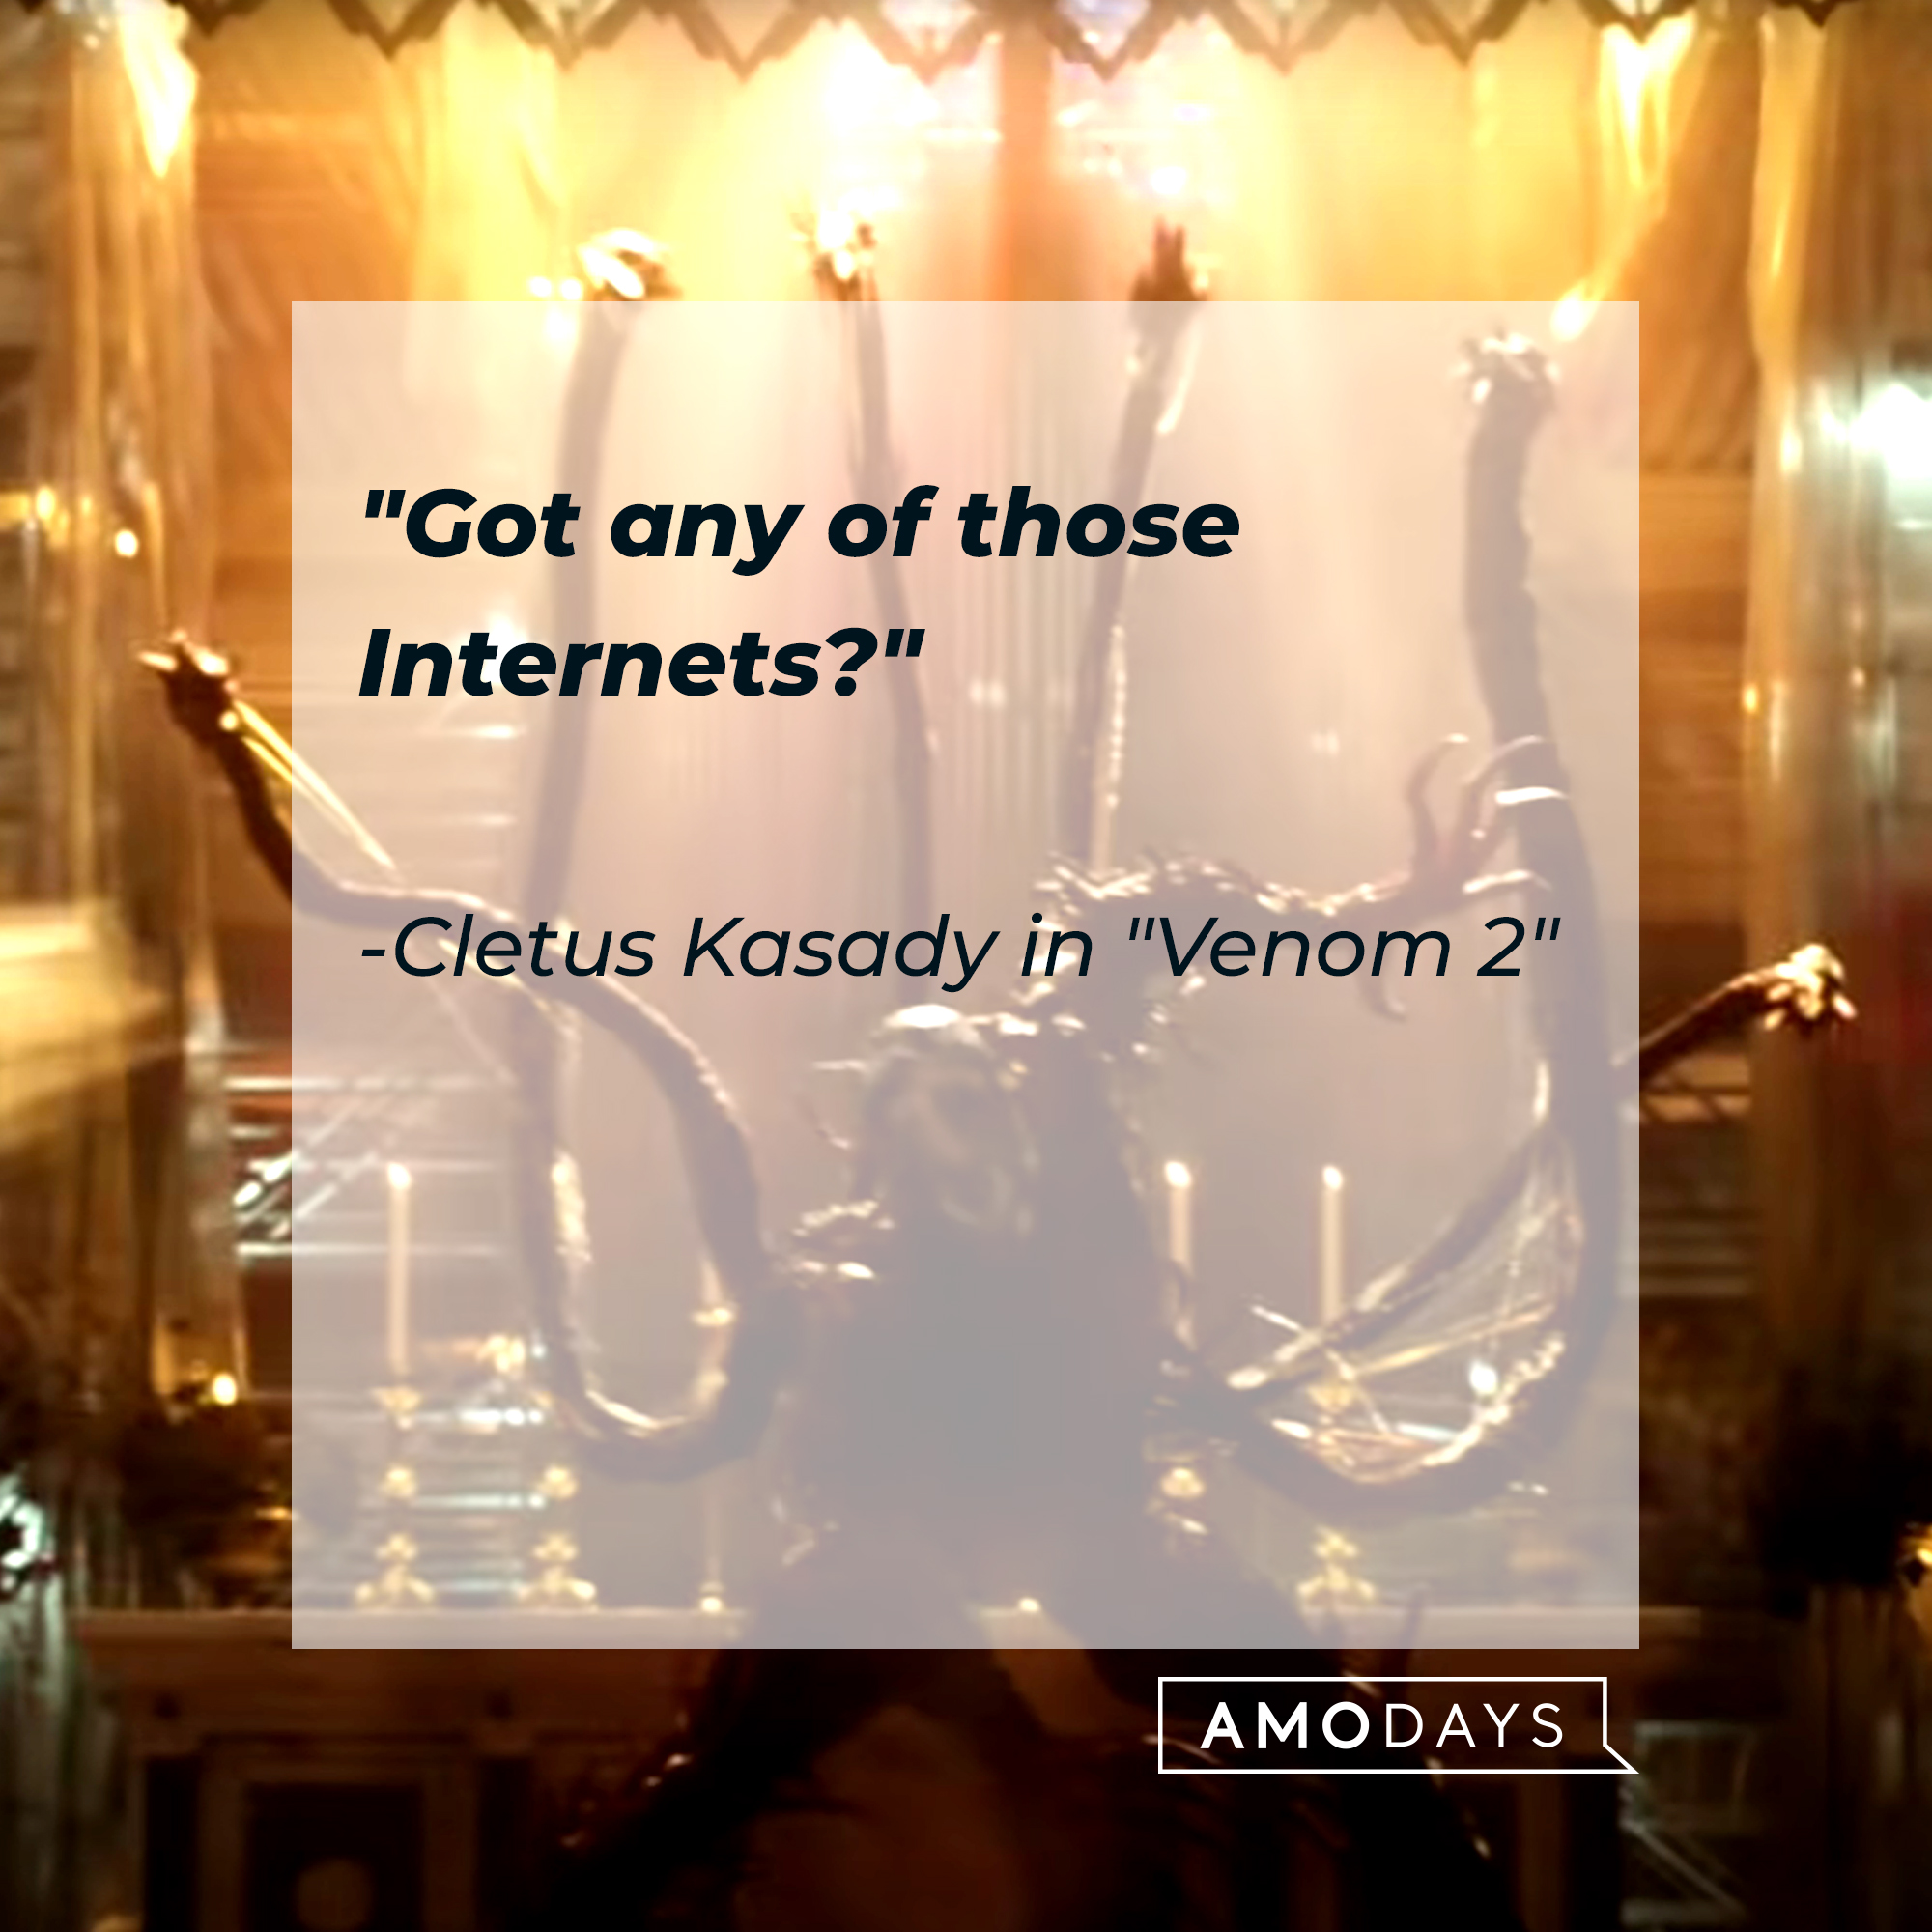 Carnage with Cletus Kasady's quote, "Got any of those Internets?" | Source: YouTube/sonypictures